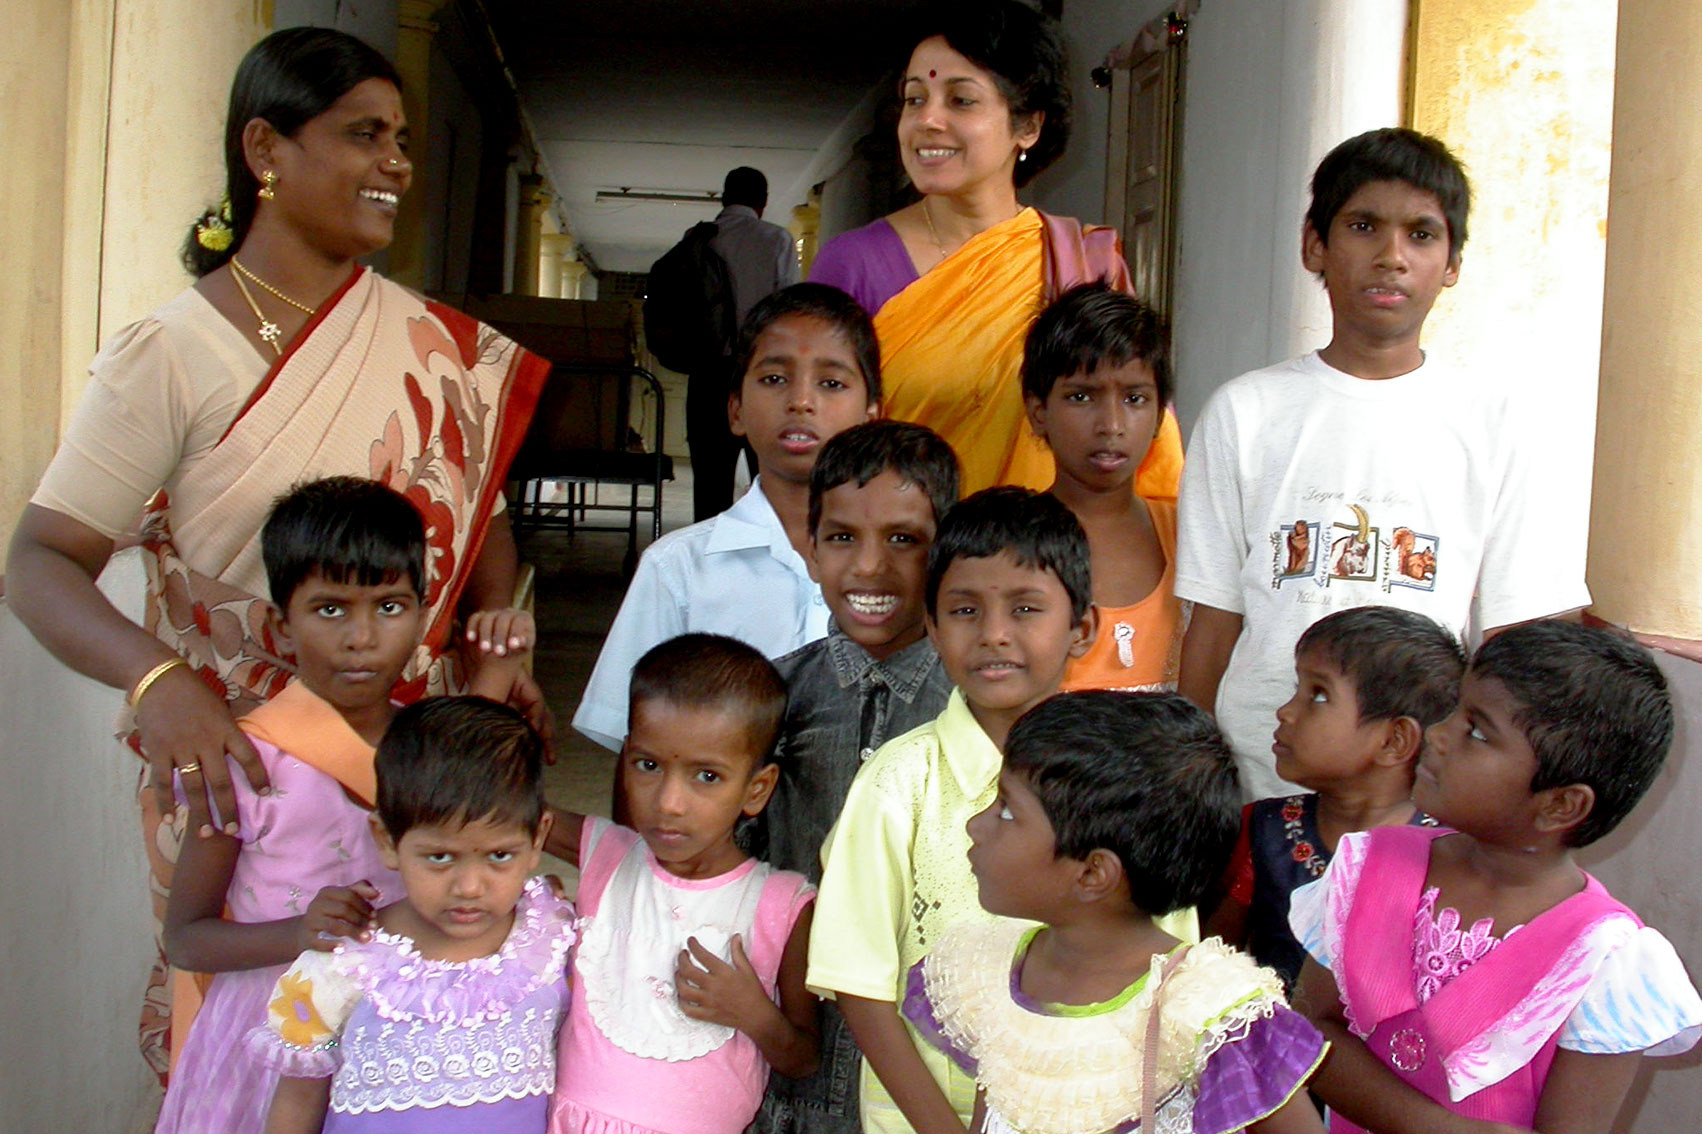 Dr. Soumya Swaminathan and a woman stand for a photo op surrounded by children.